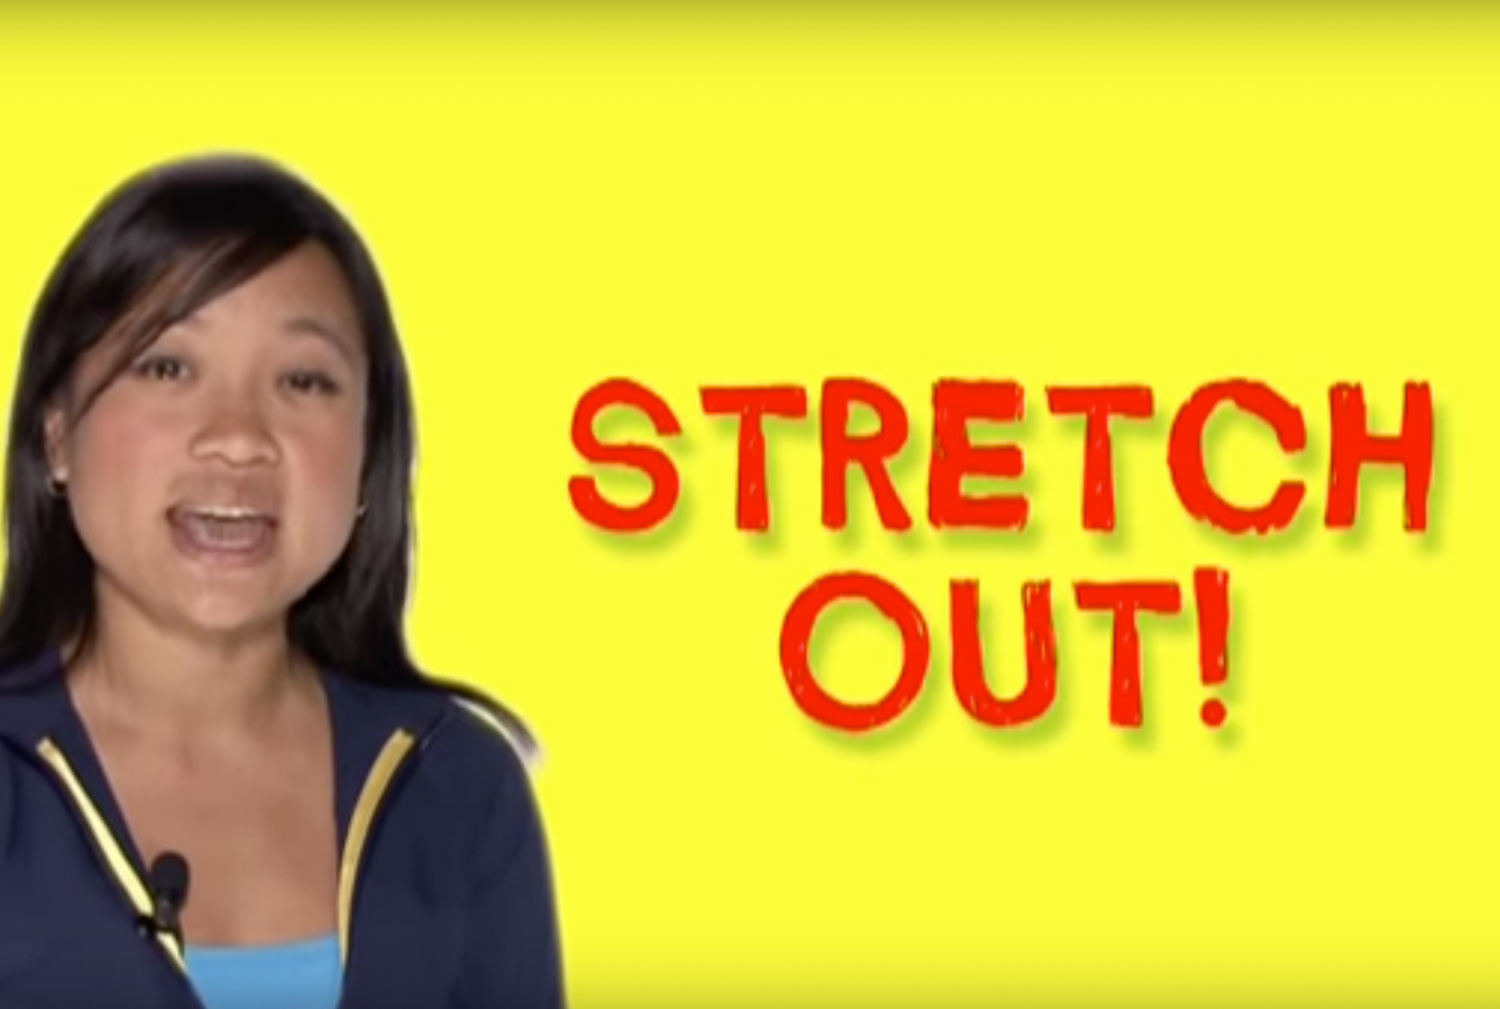 Image from a video. Woman and video title: Stretch Out!